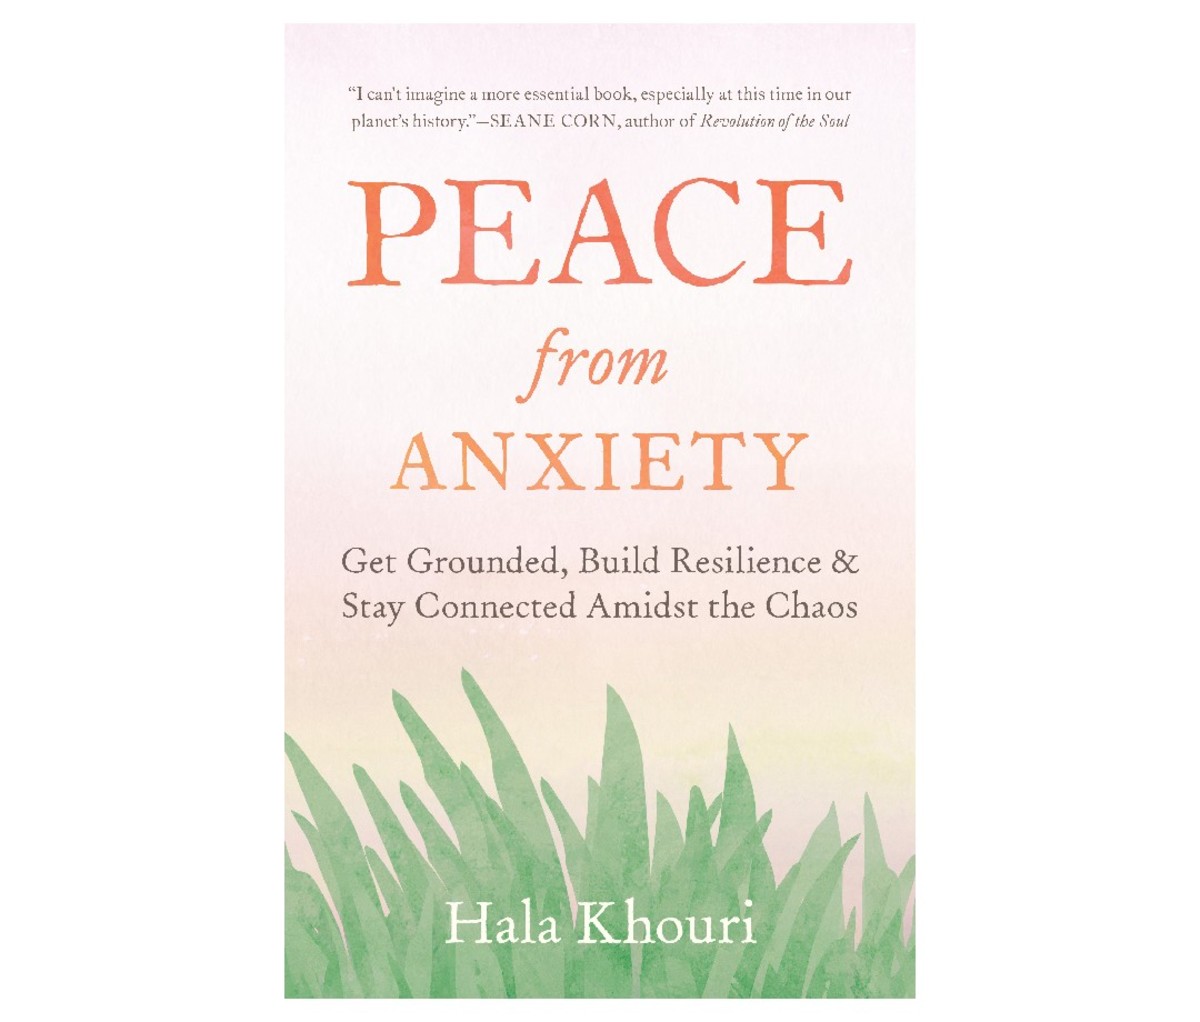 Peace From Fear: Getting Grounded, Building Resilience, and Staying Connected Amid the Chaos by Hala Khouri